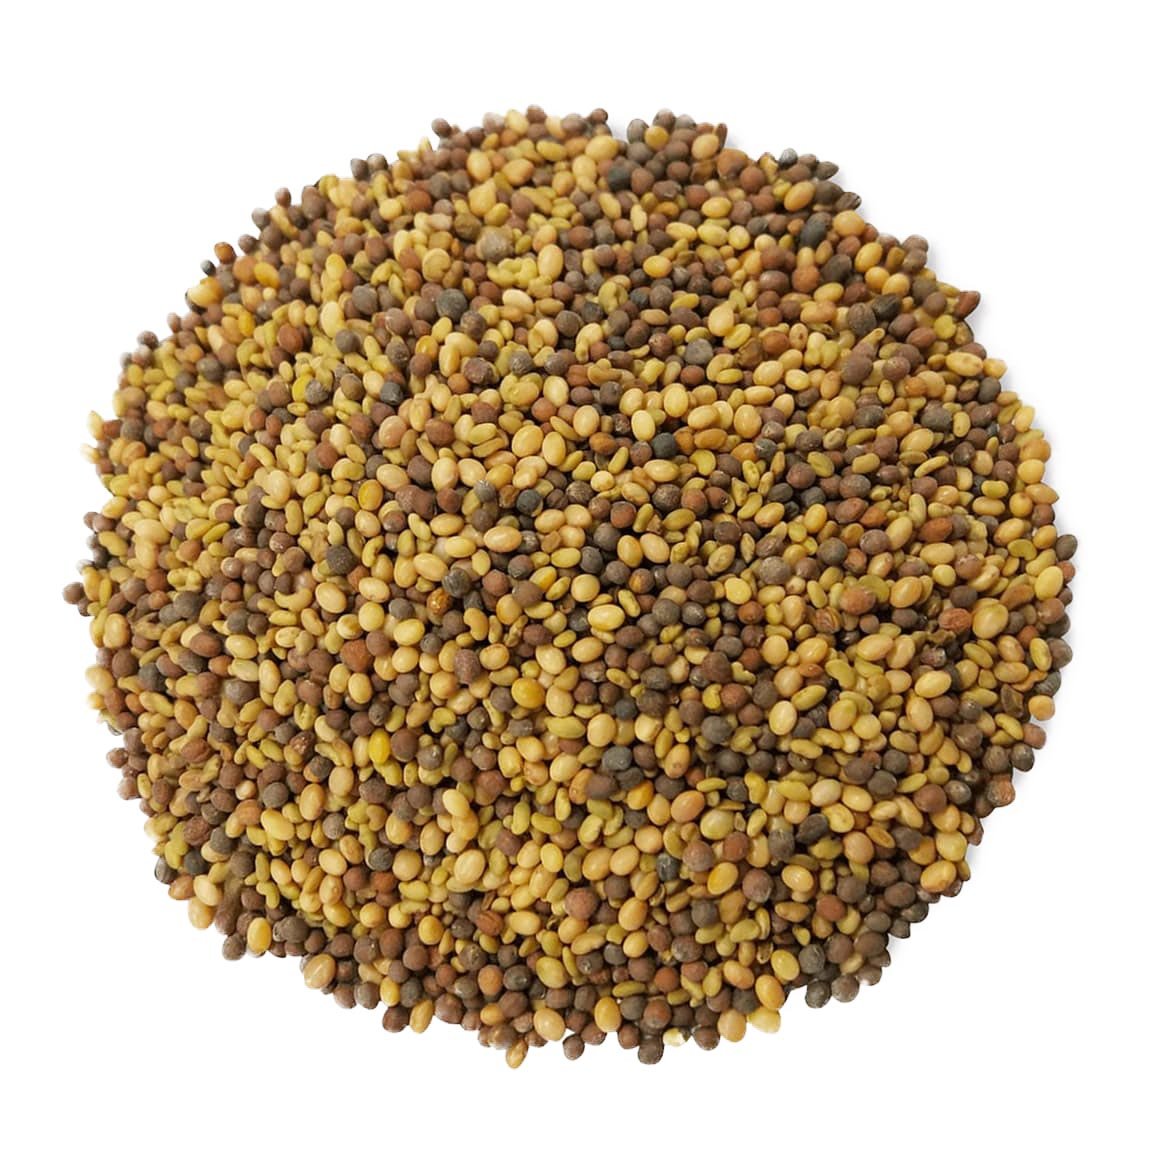 organic-antioxidant-mix-of-sprouting-seeds-main-min-upd